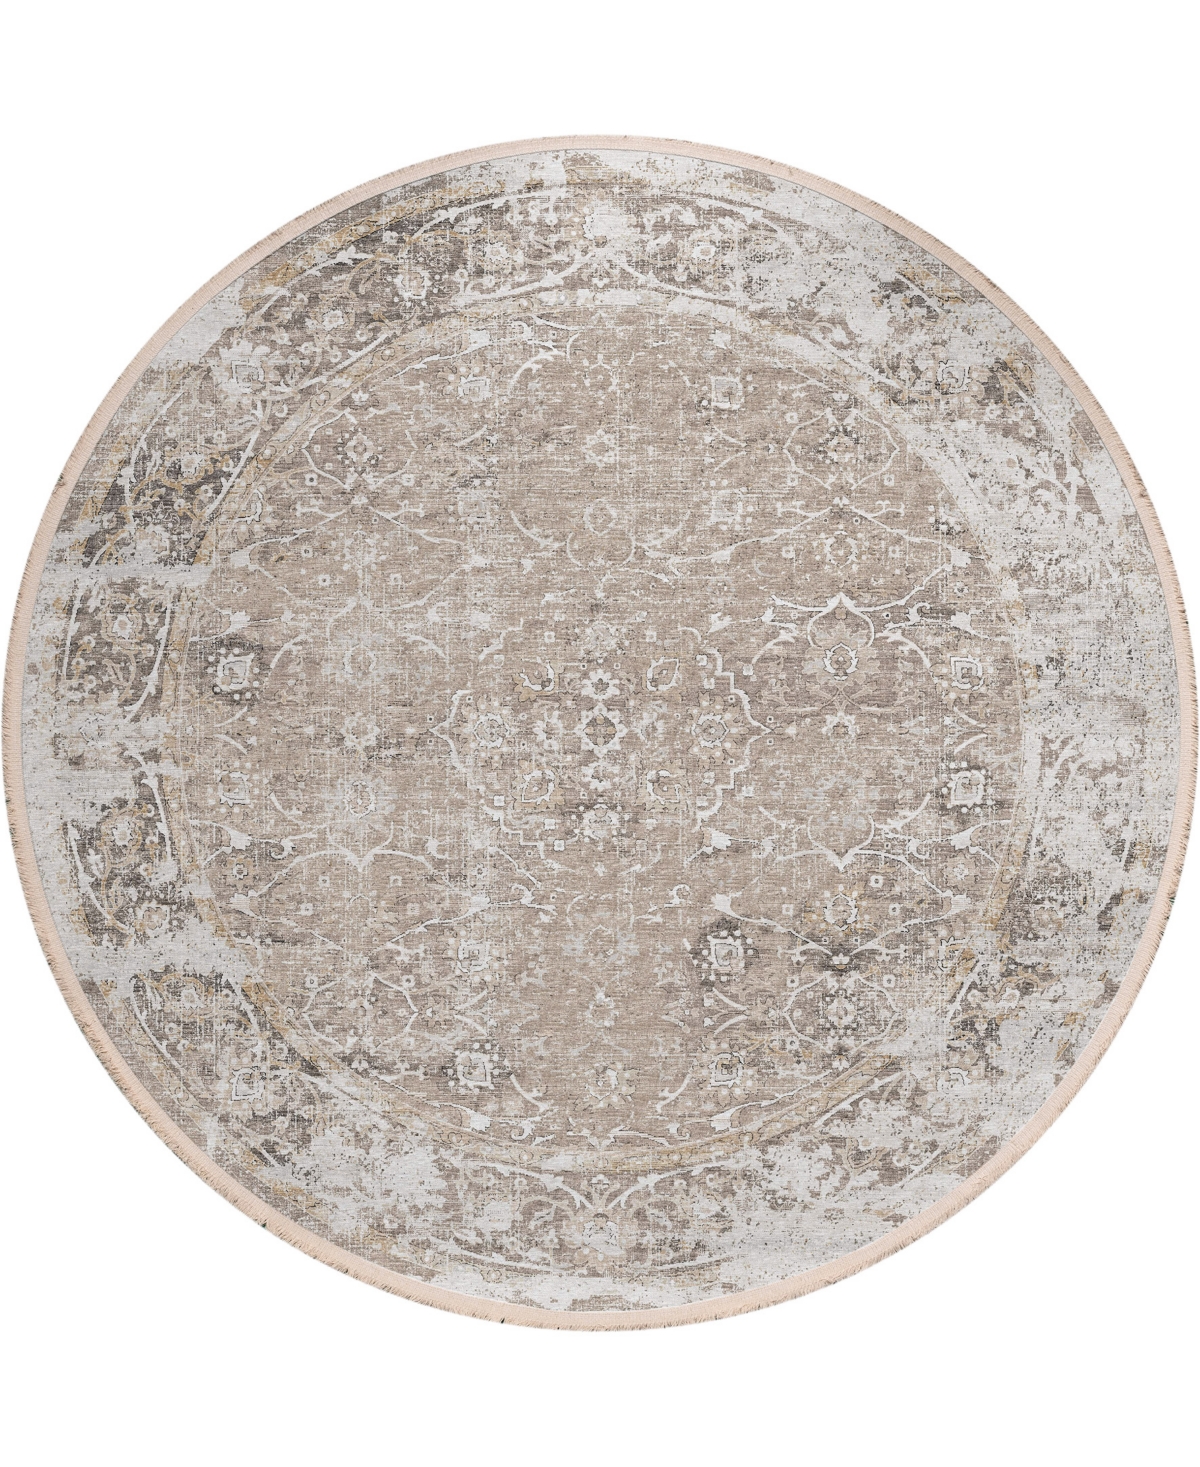 D Style Ionic IOC2 6' x 6' Round Area Rug - Taupe